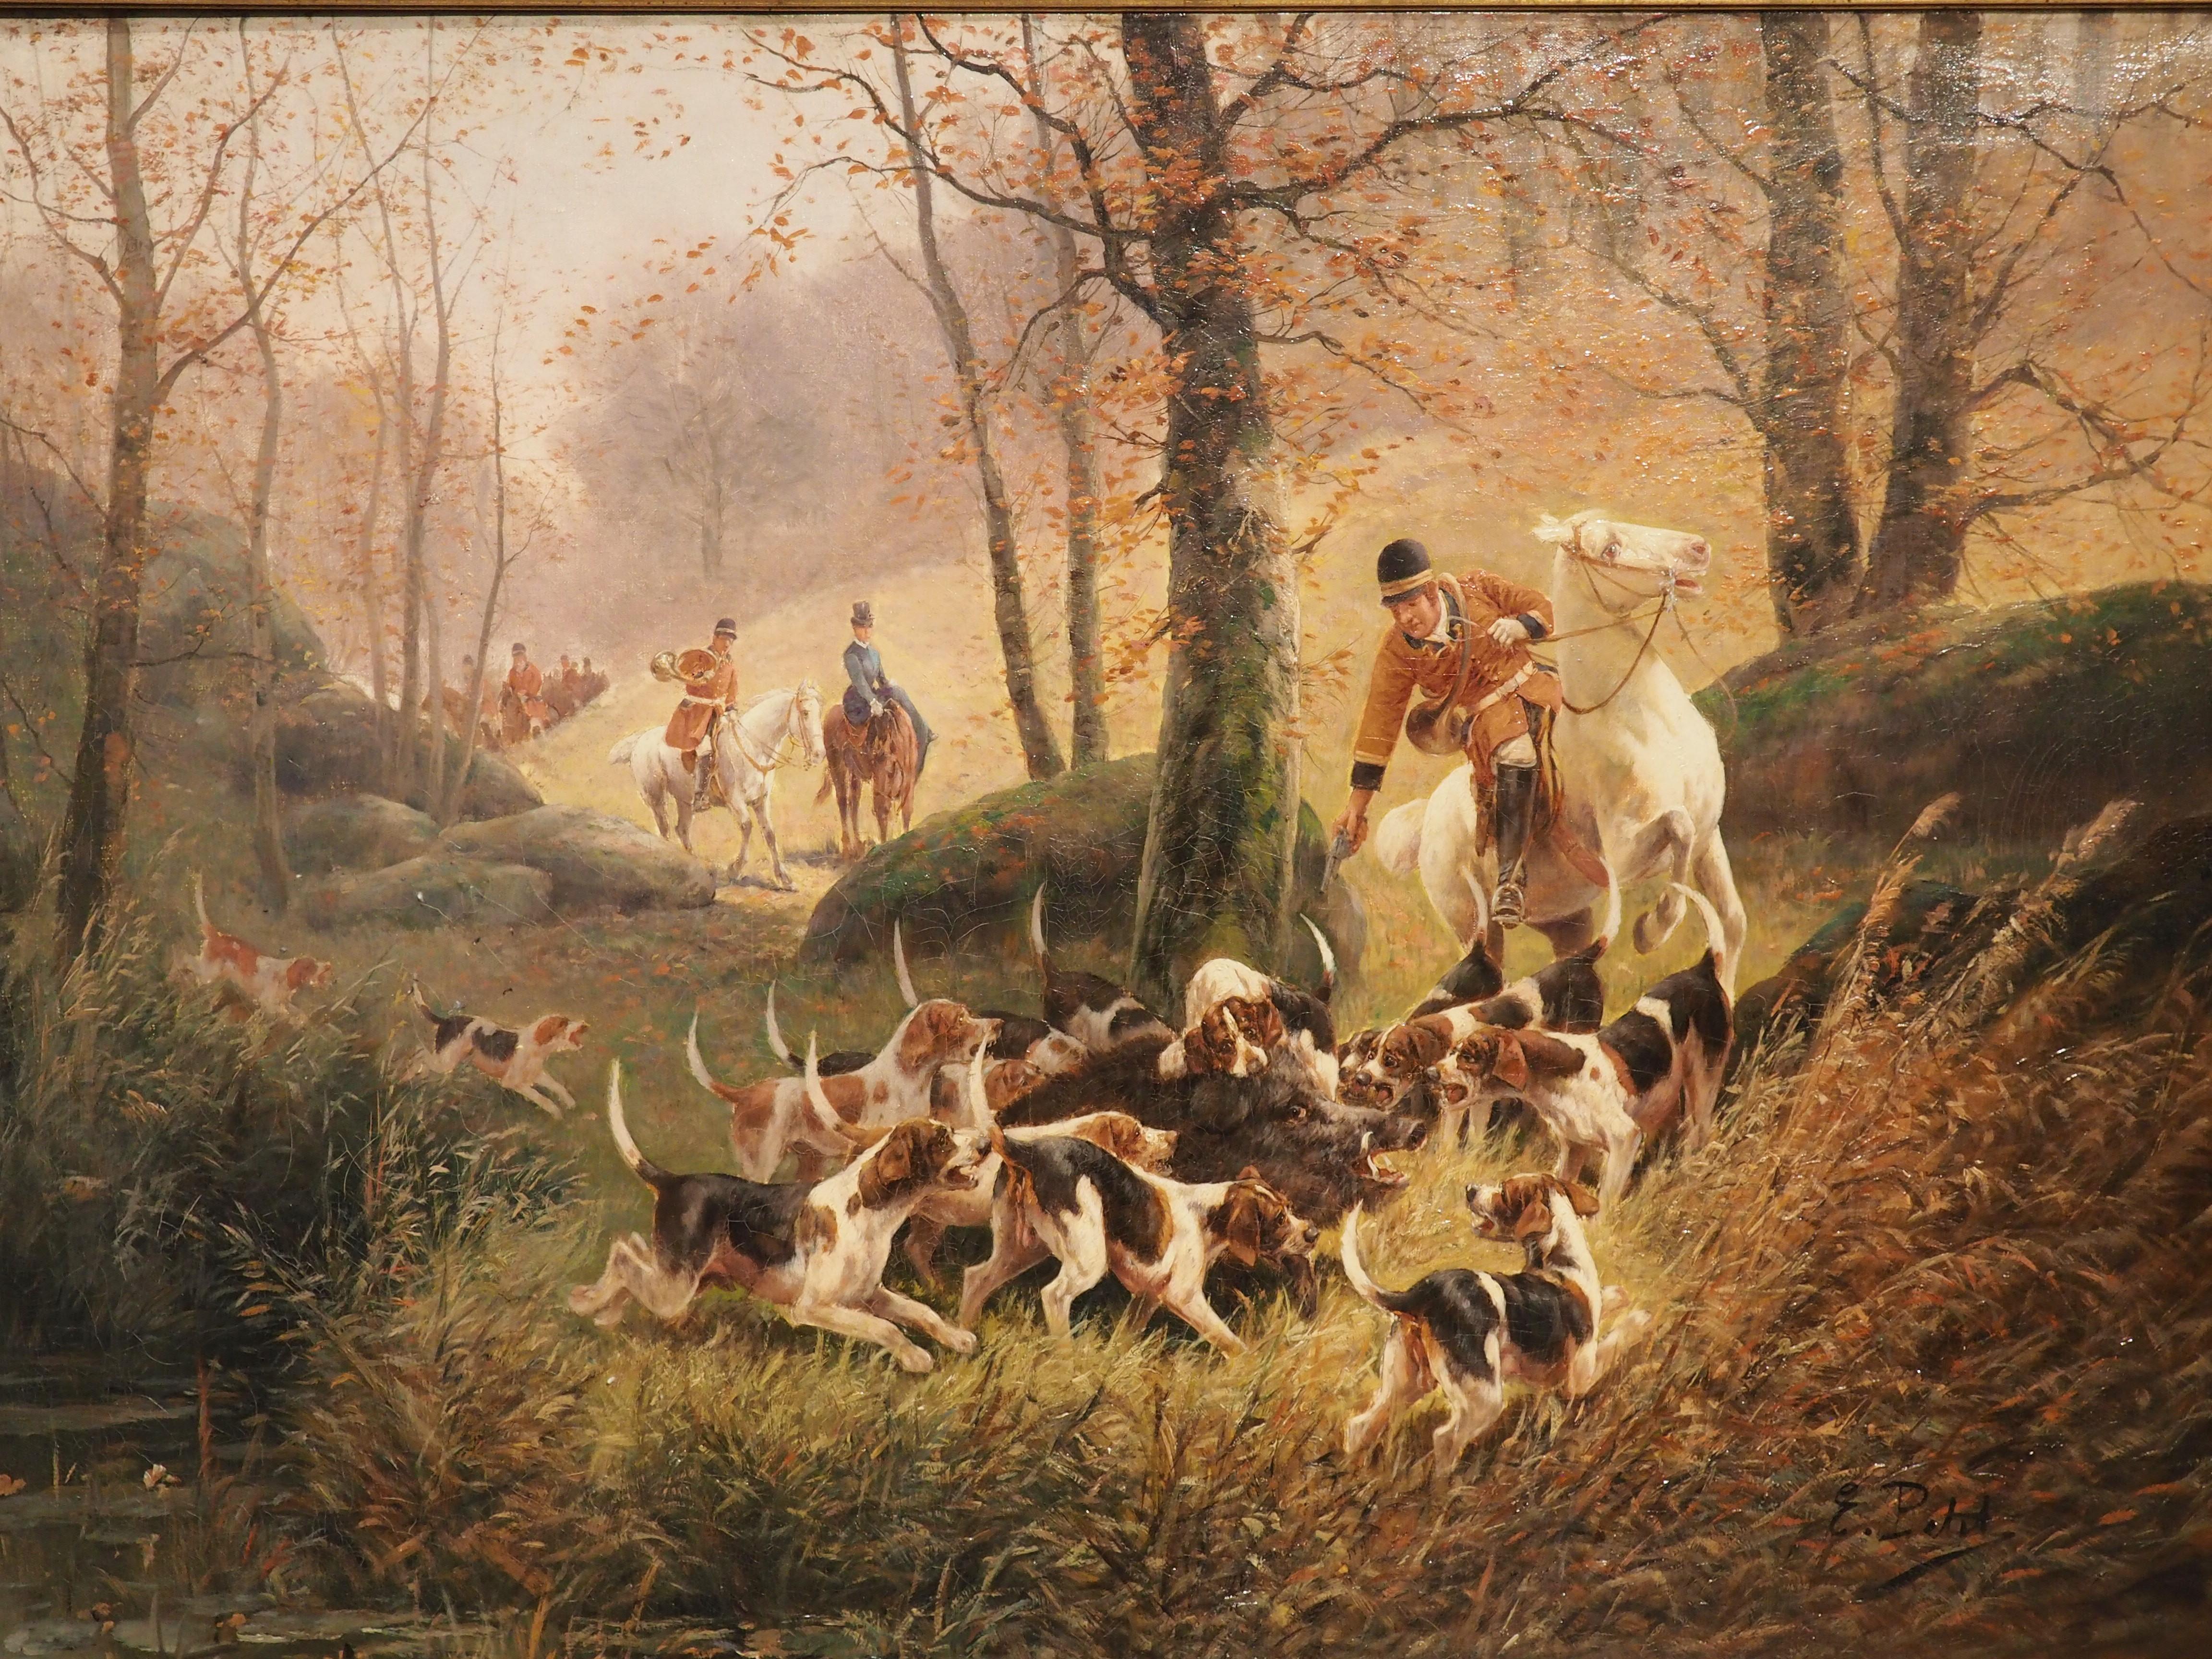 19th Century Antique French Oil Painting of a Boar Hunt, Signed E. Petit (1839-1886)